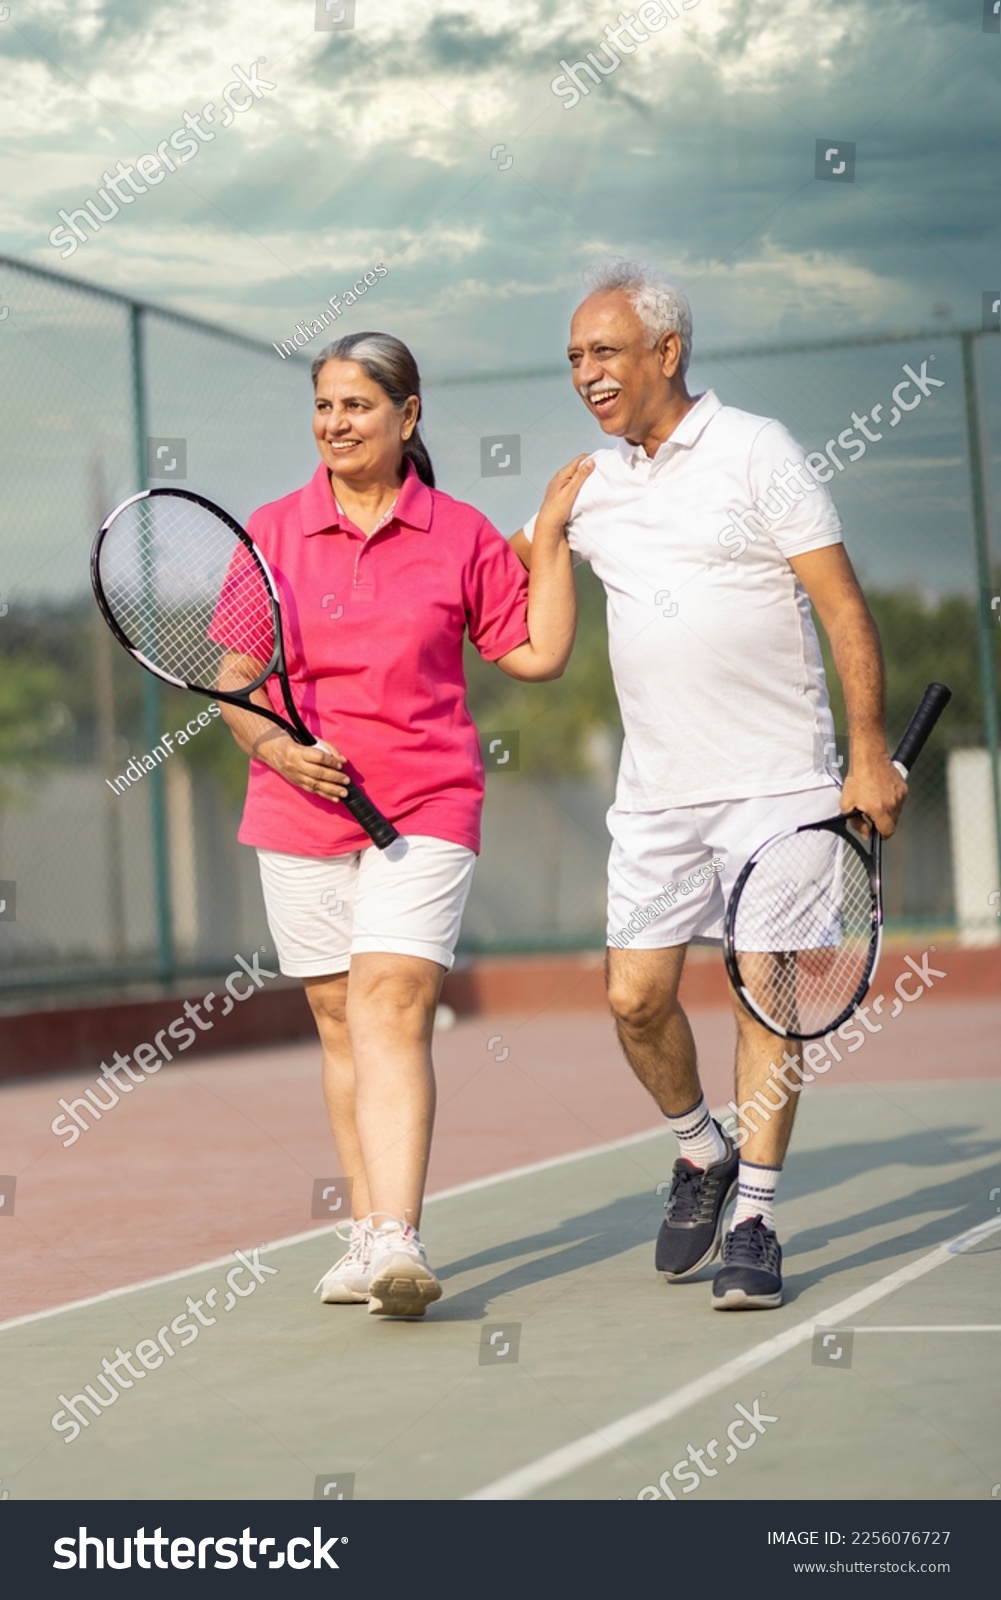 Senior man and woman hugging after playing a game of tennis at an outdoor court. #2256076727